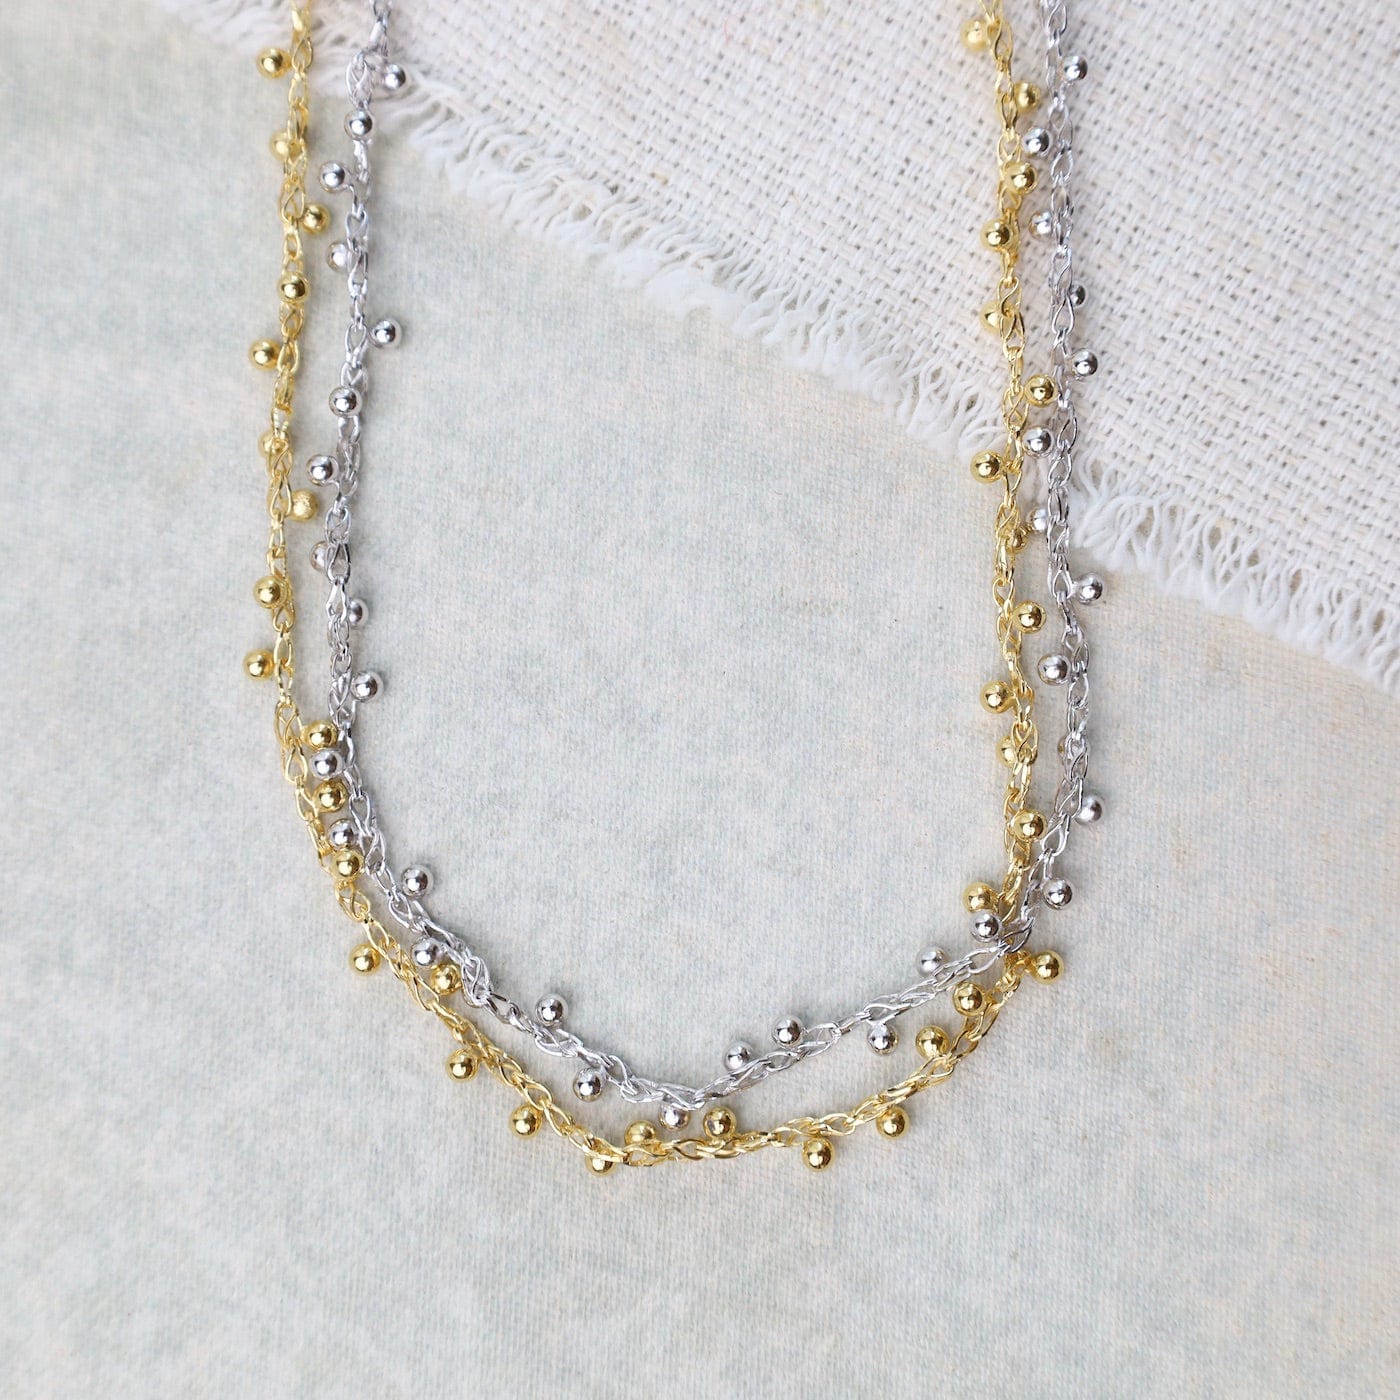 NKL-GPL Sterling Silver & Yellow Gold Plated Lokelani Necklace